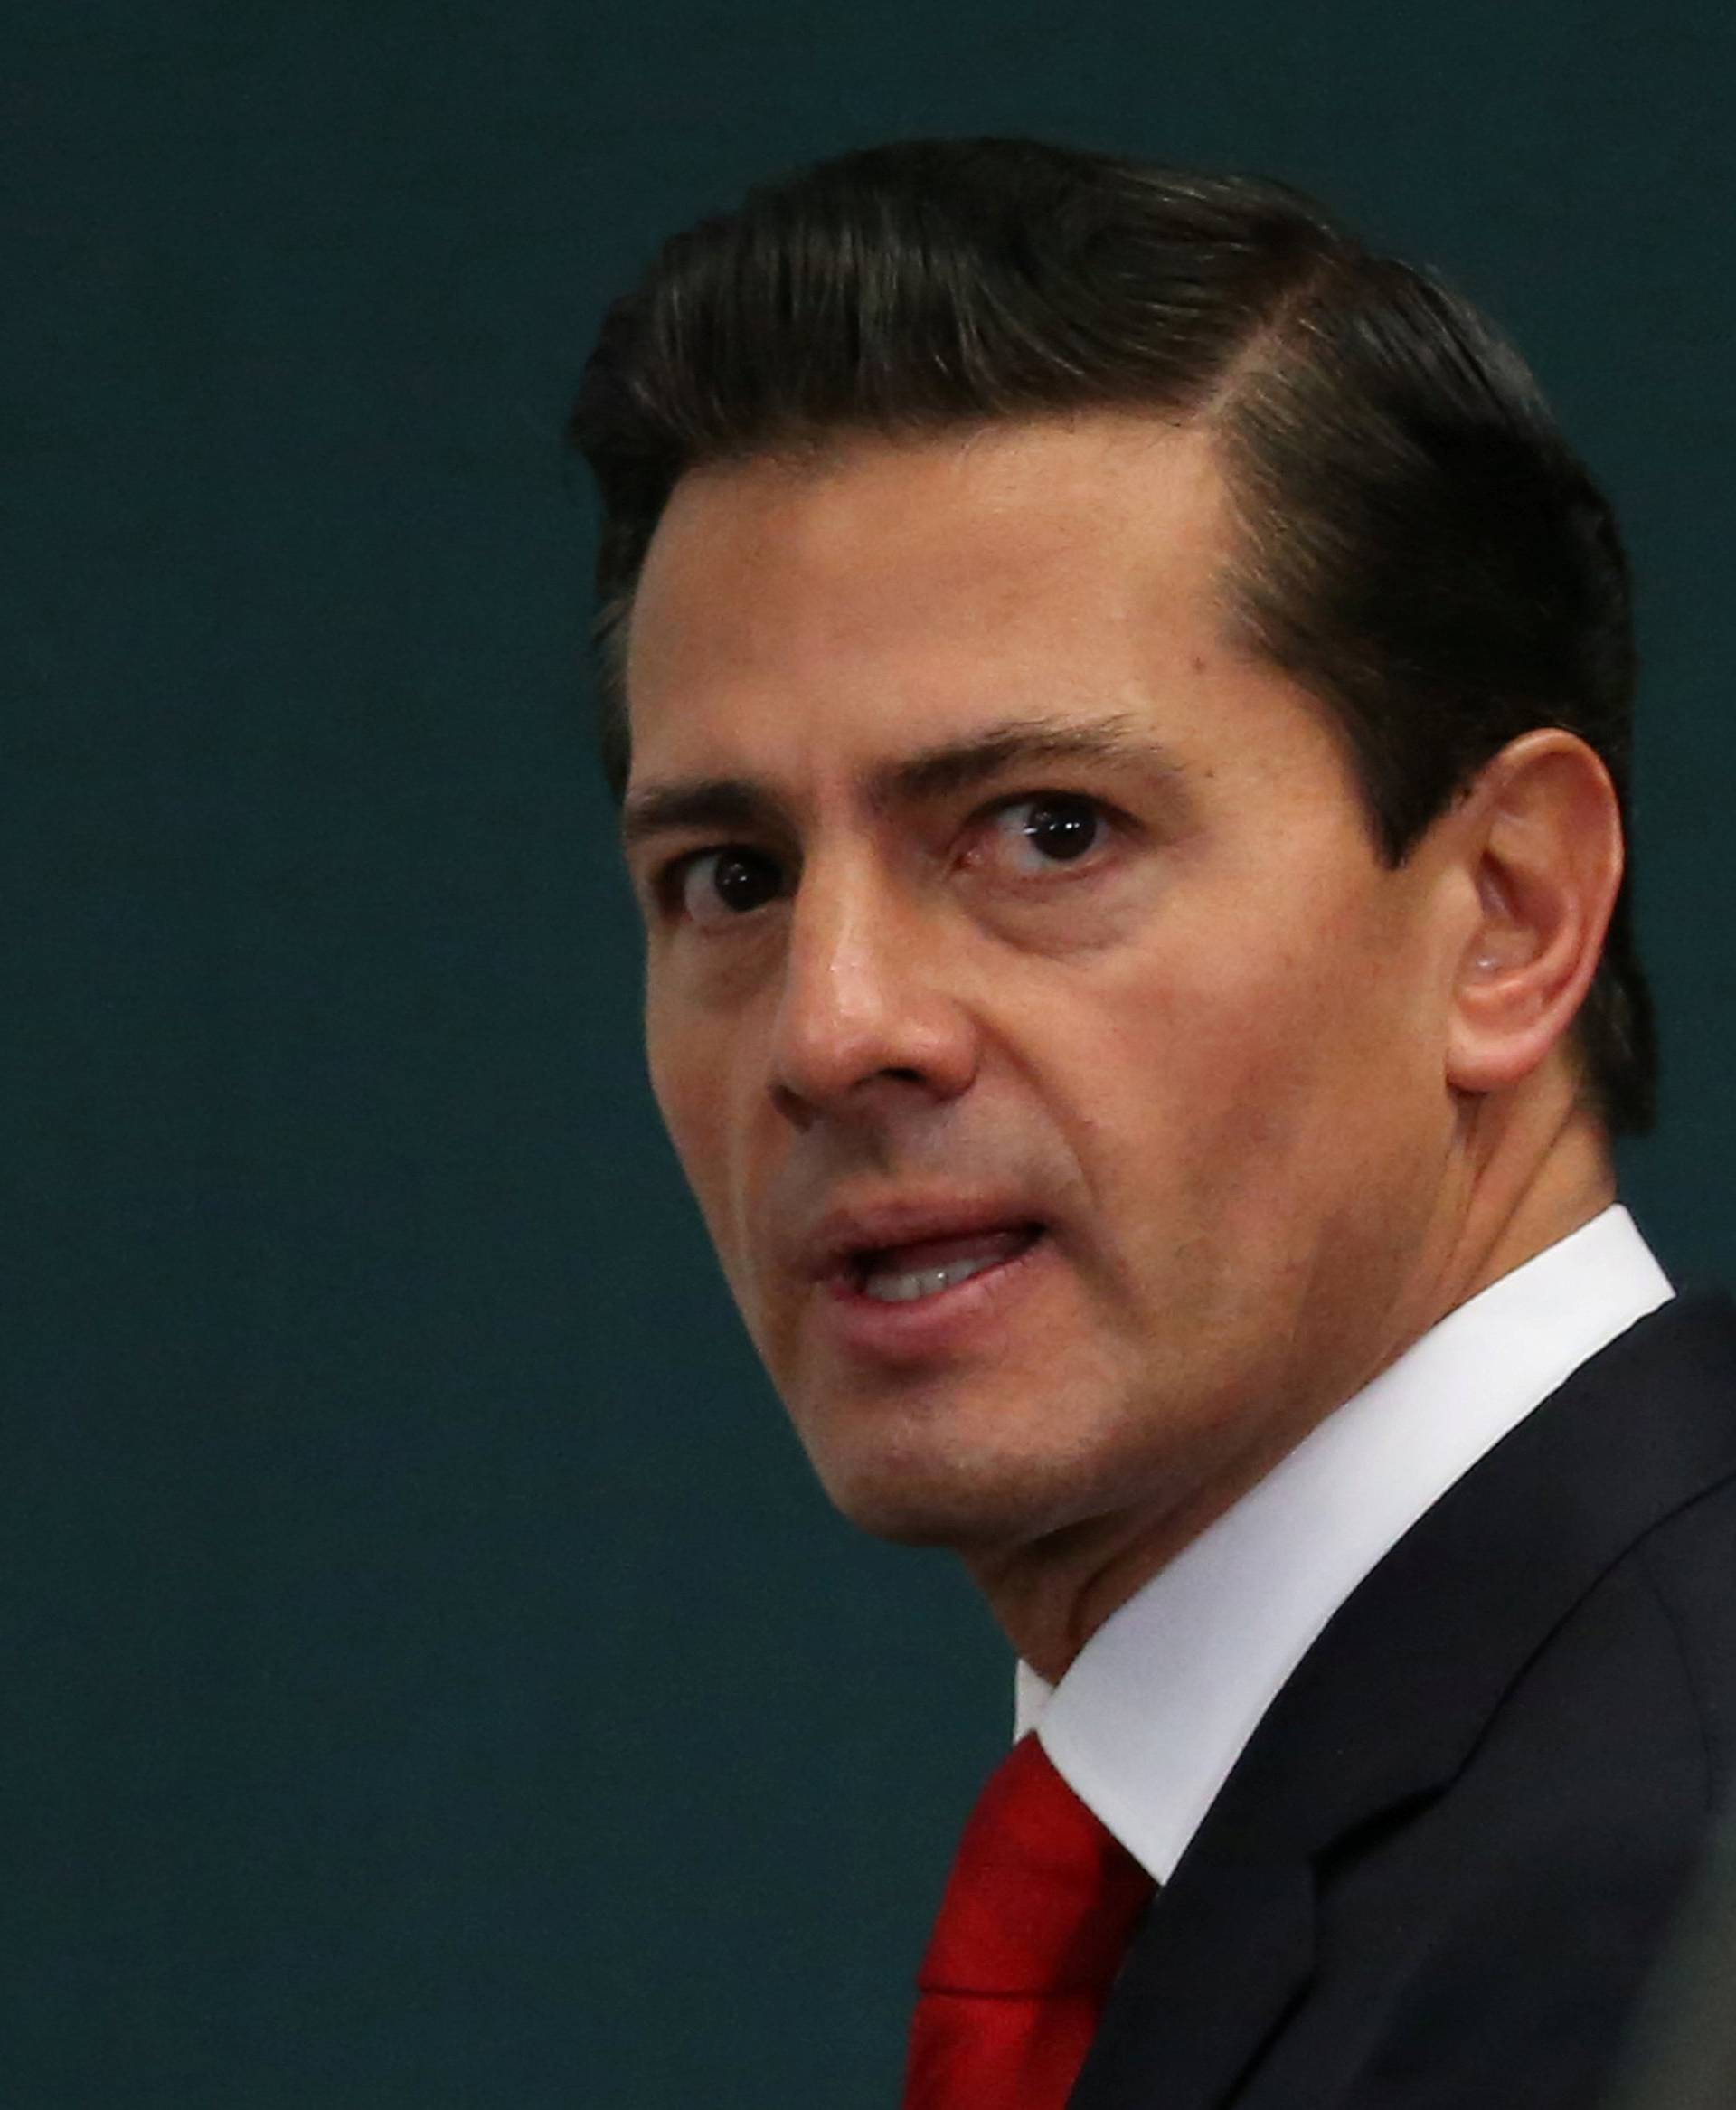 Mexico's President Enrique Pena Nieto is seen during the delivery of a message about foreign affairs at Los Pinos presidential residence in Mexico City